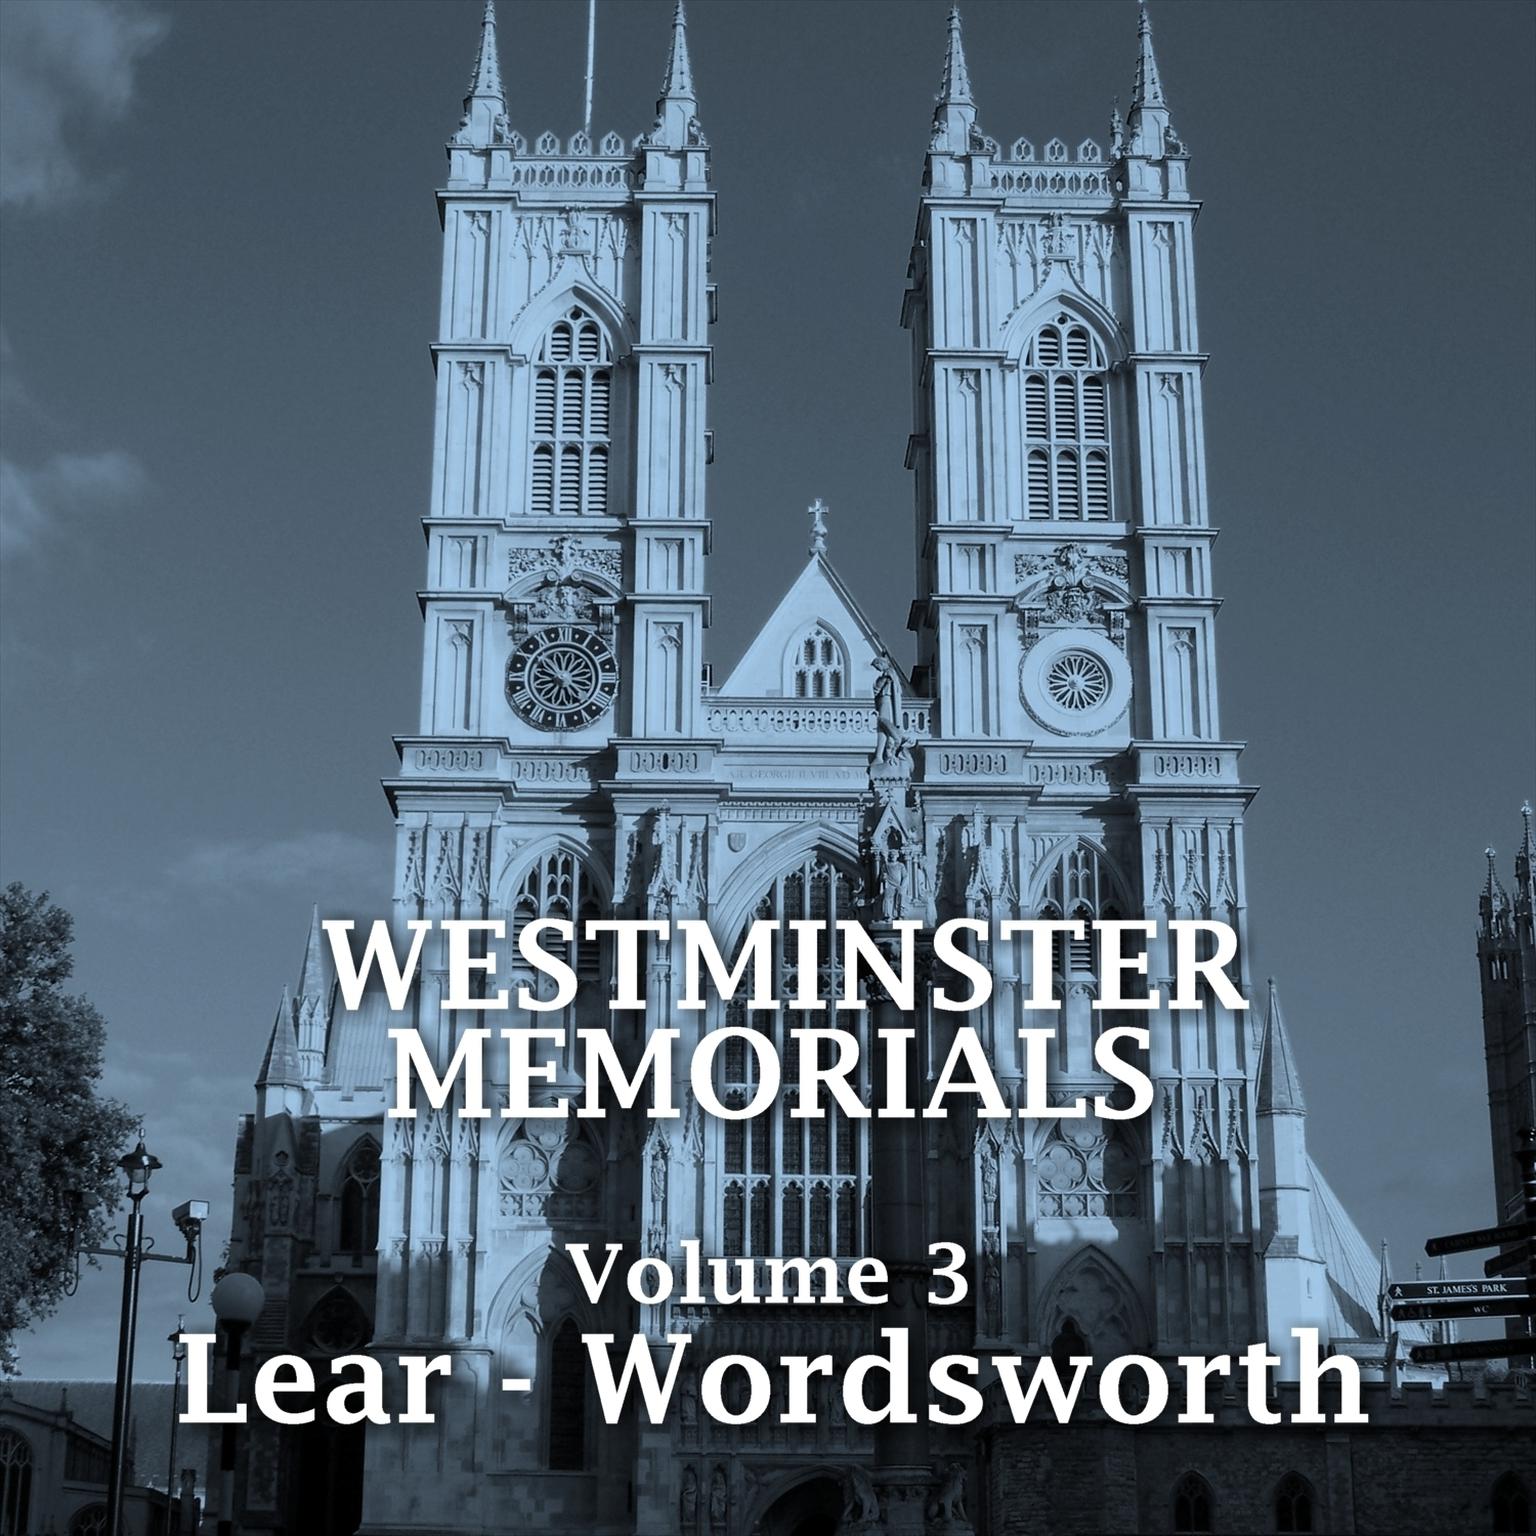 Westminster Memorials, Vol. 3 Audiobook, by various authors